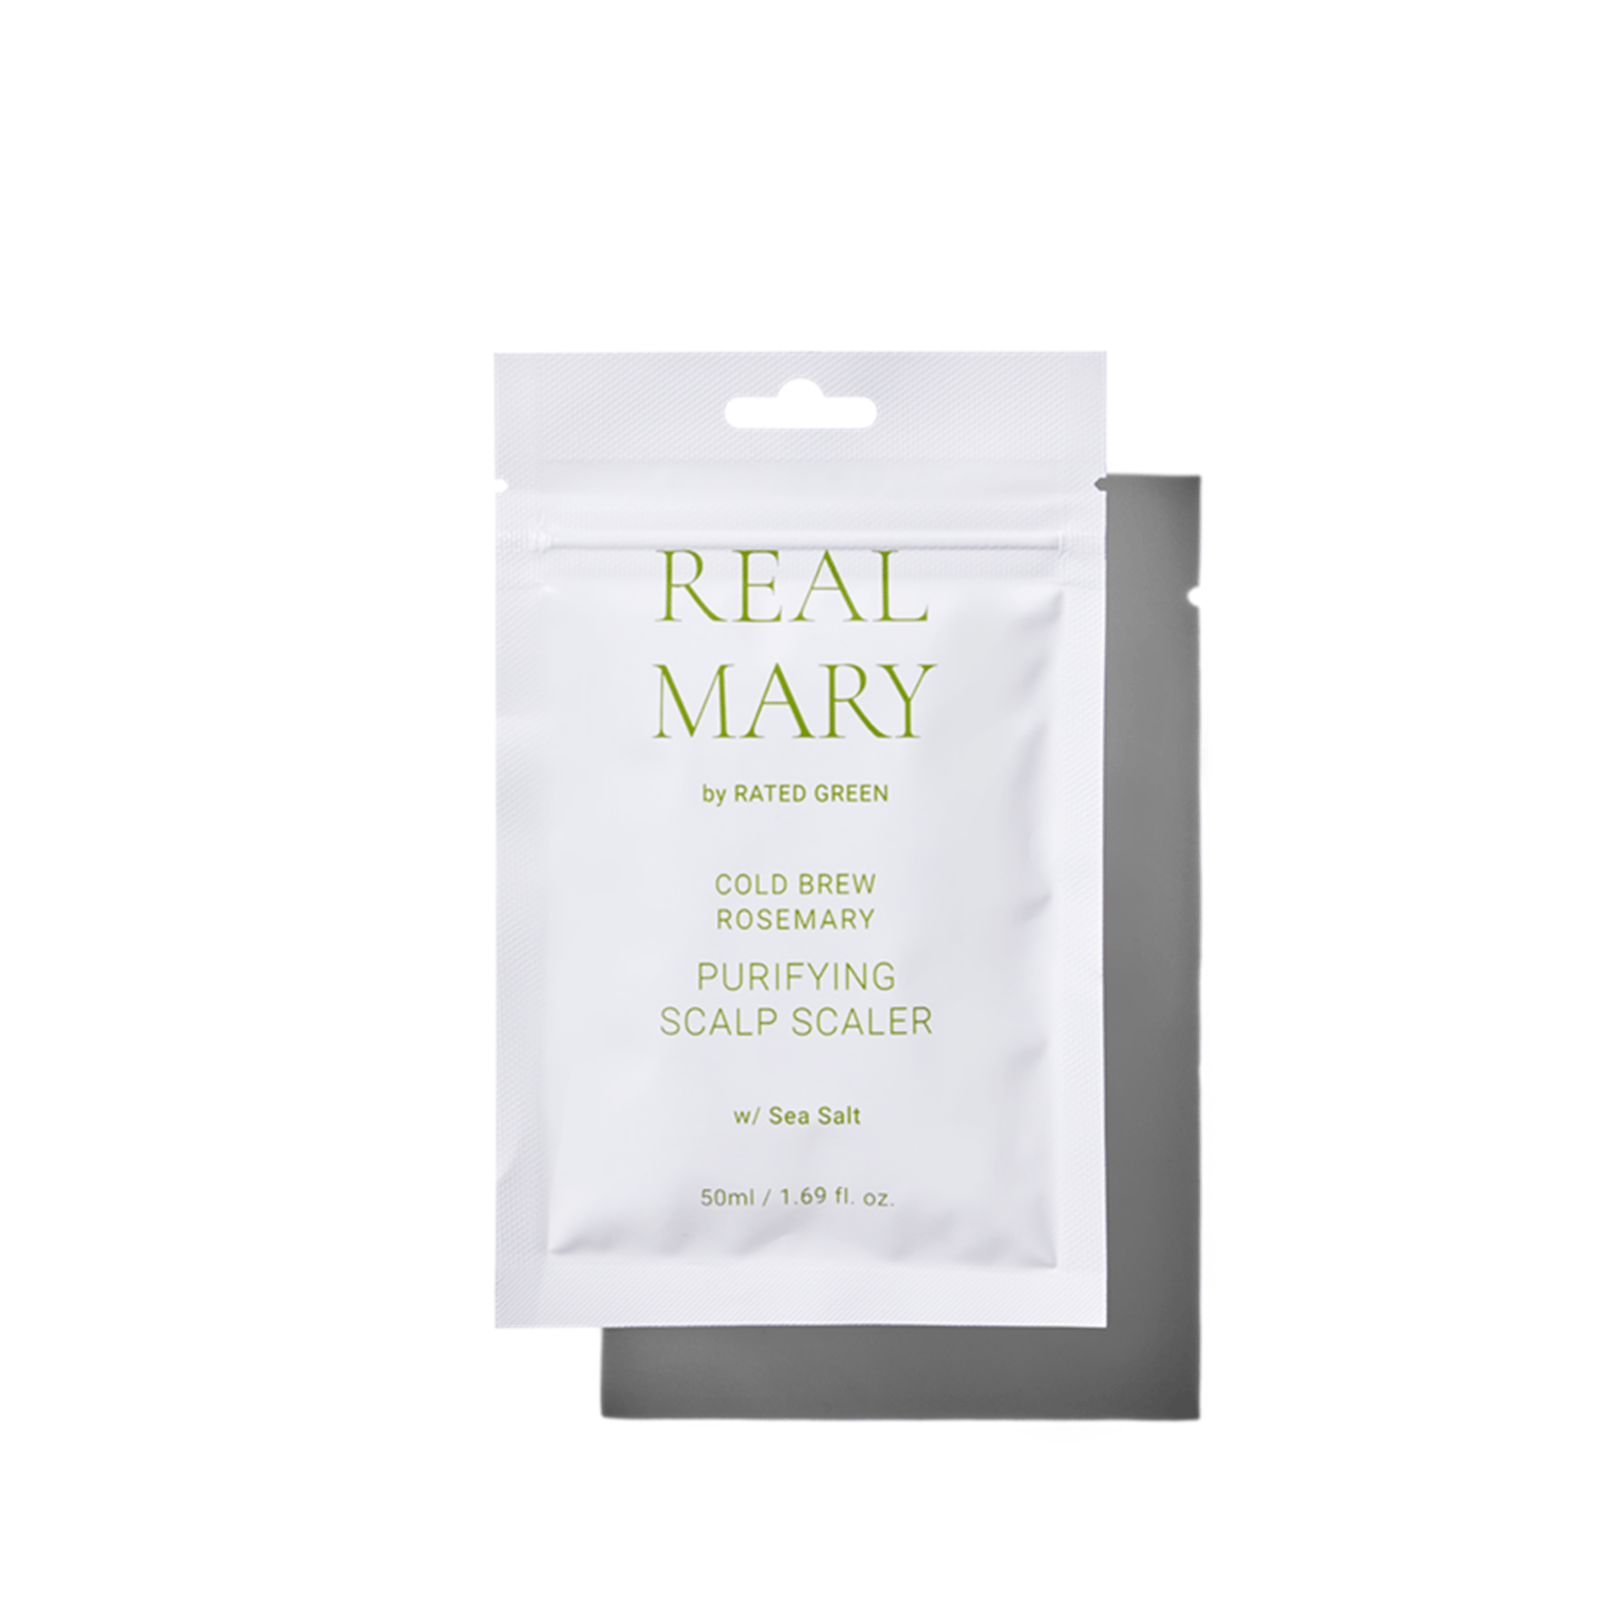 Rated Green Real Mary Purifying Scalp Scaler 50ml